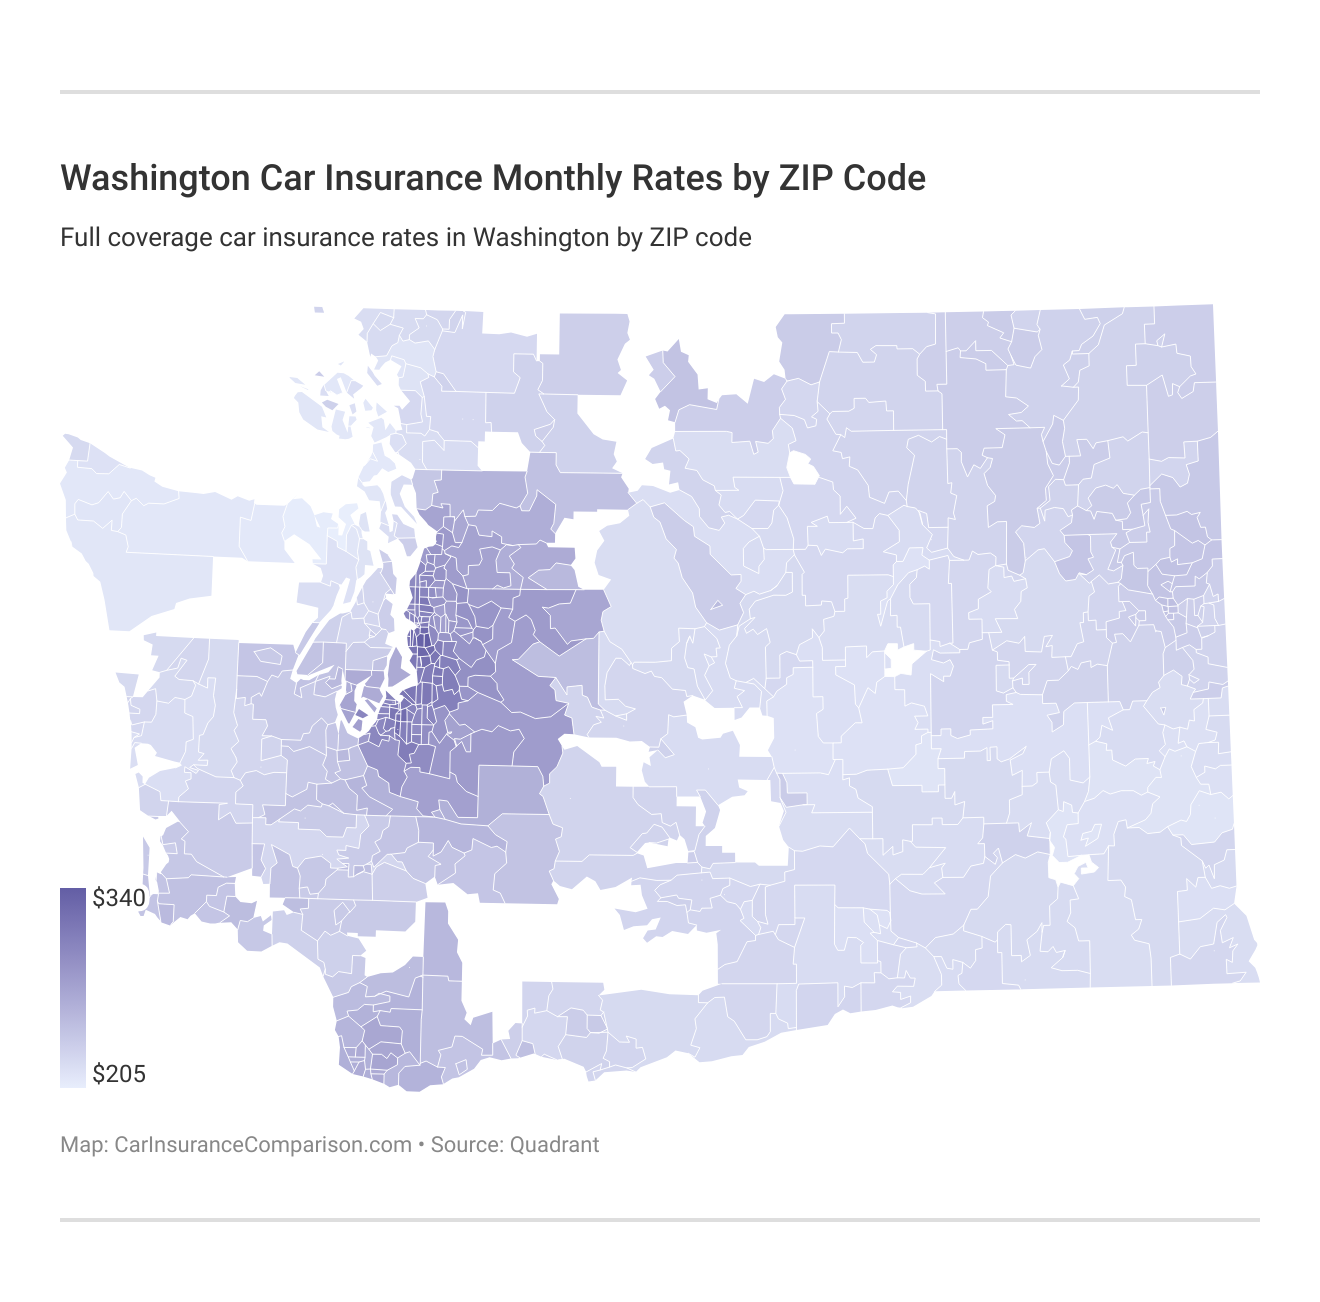 Washington Car Insurance Monthly Rates by ZIP Code